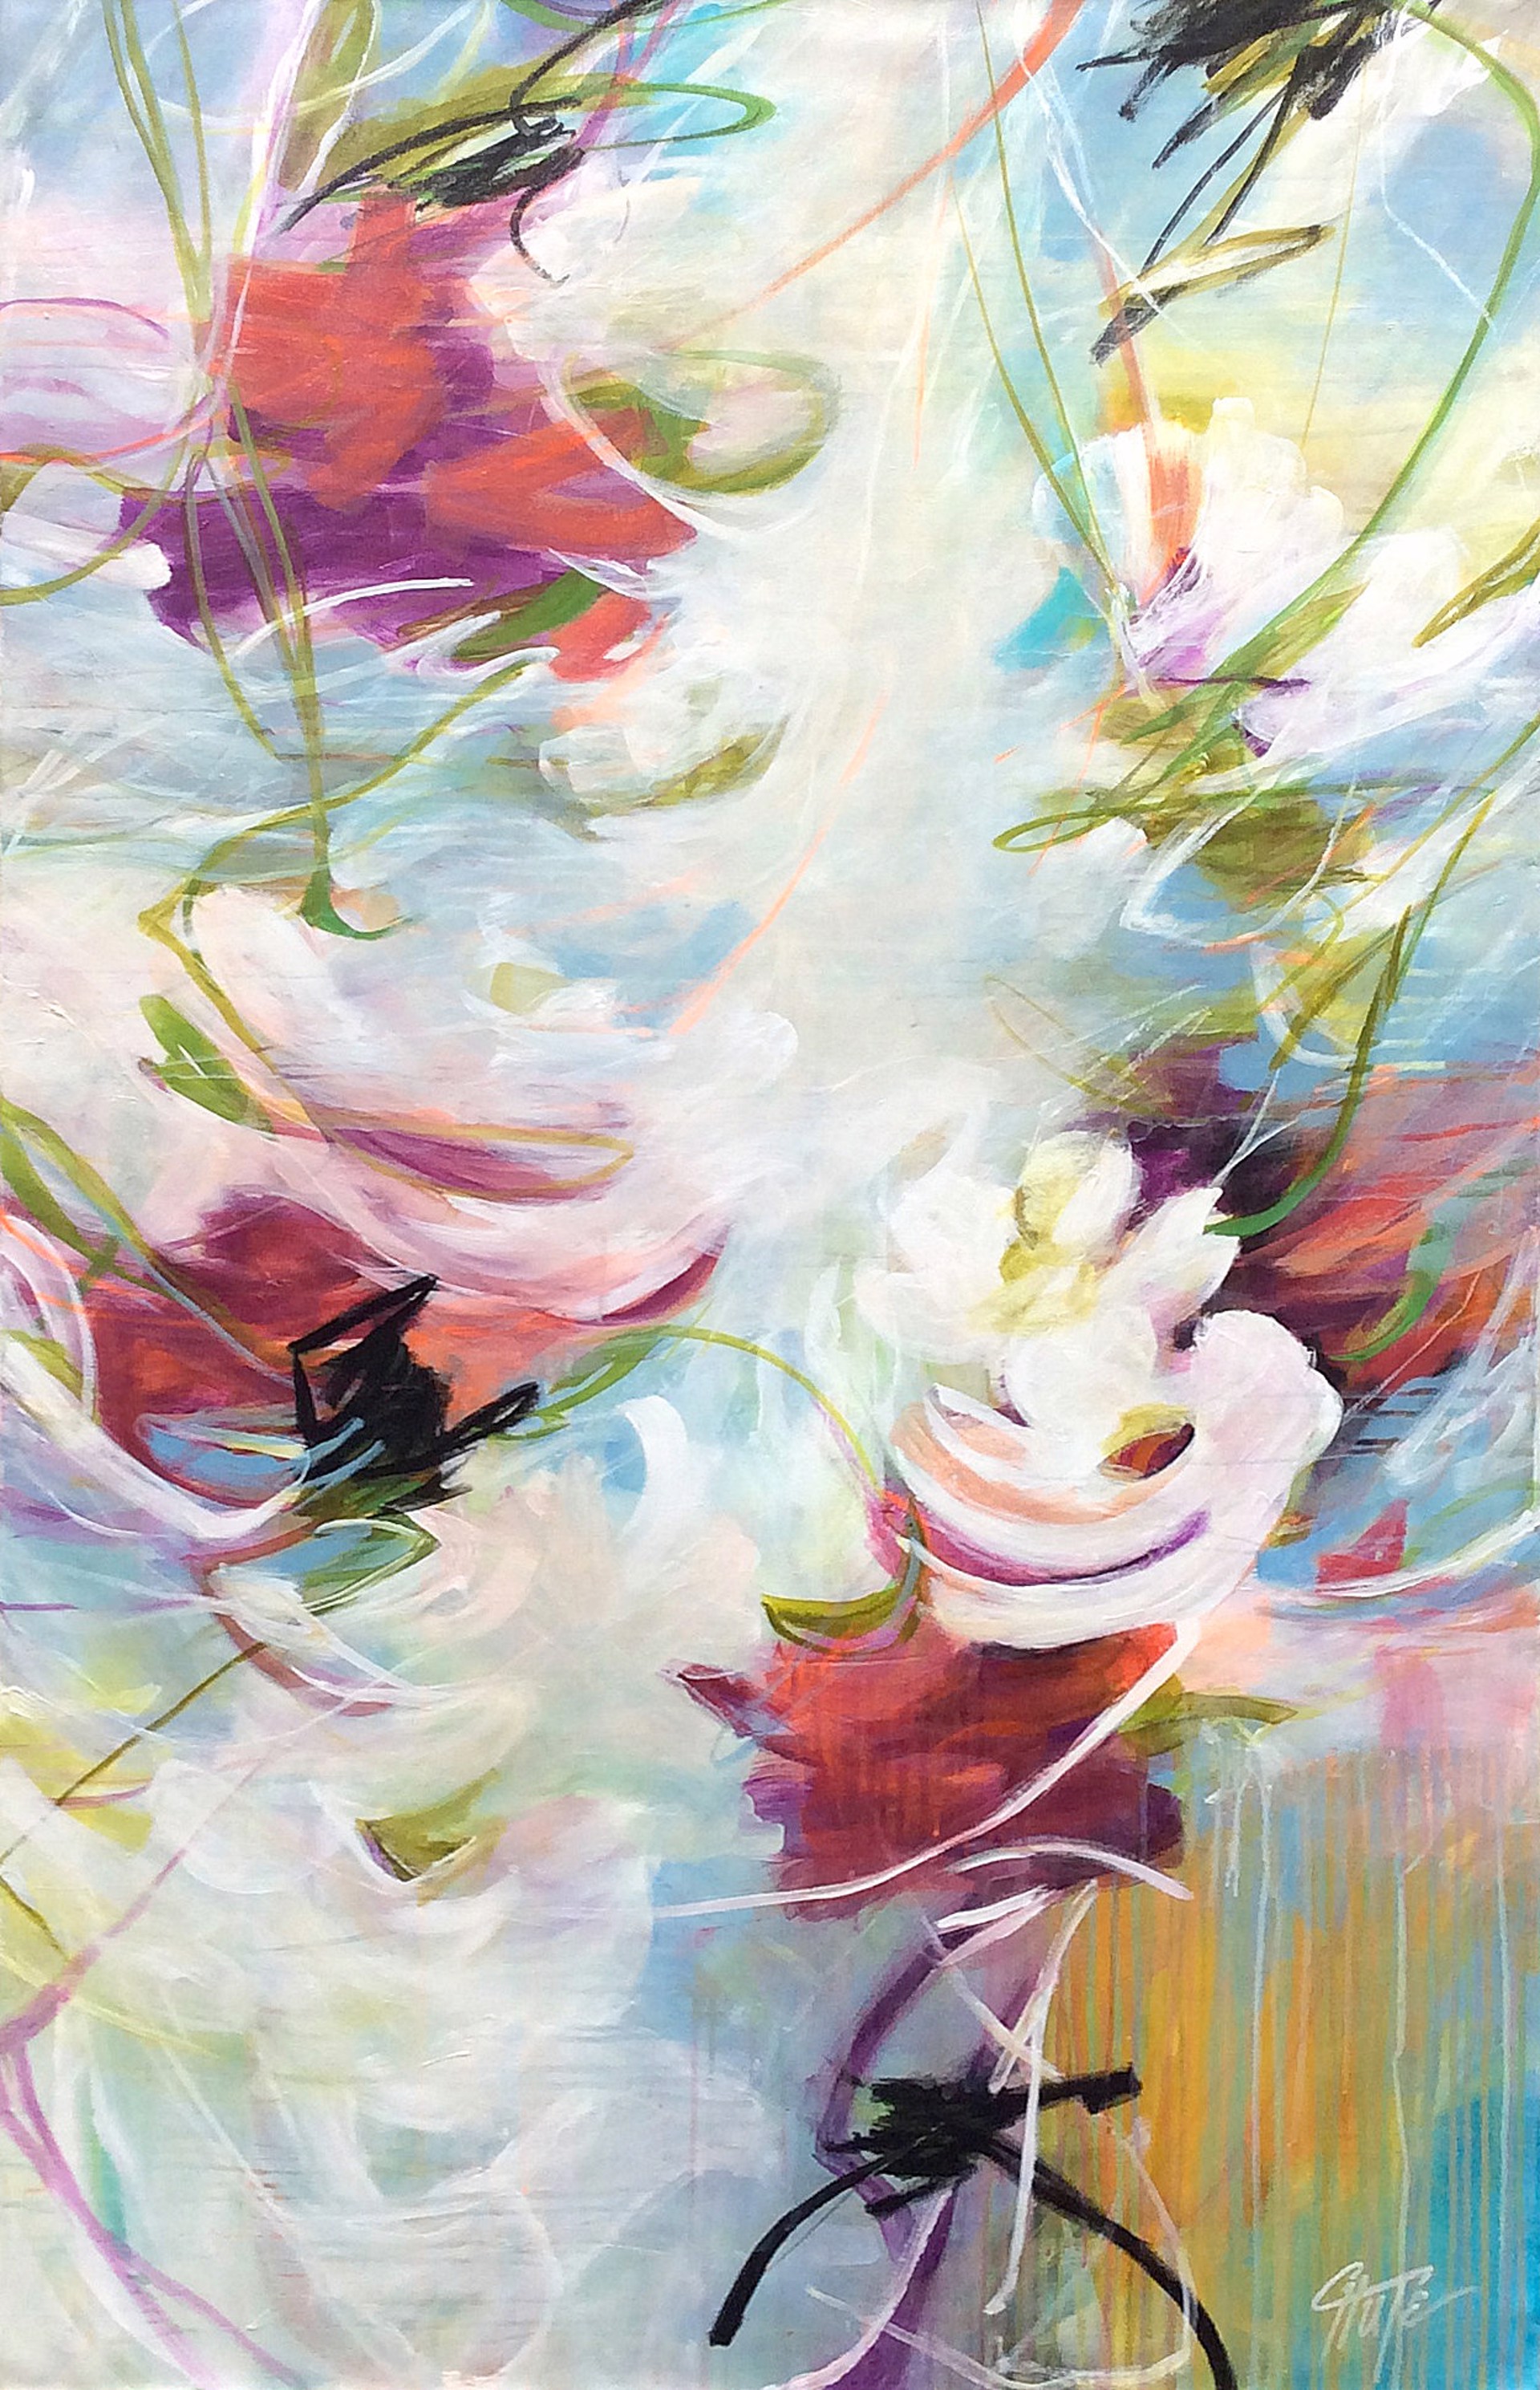 "Floral Elements" by Patricia Chute